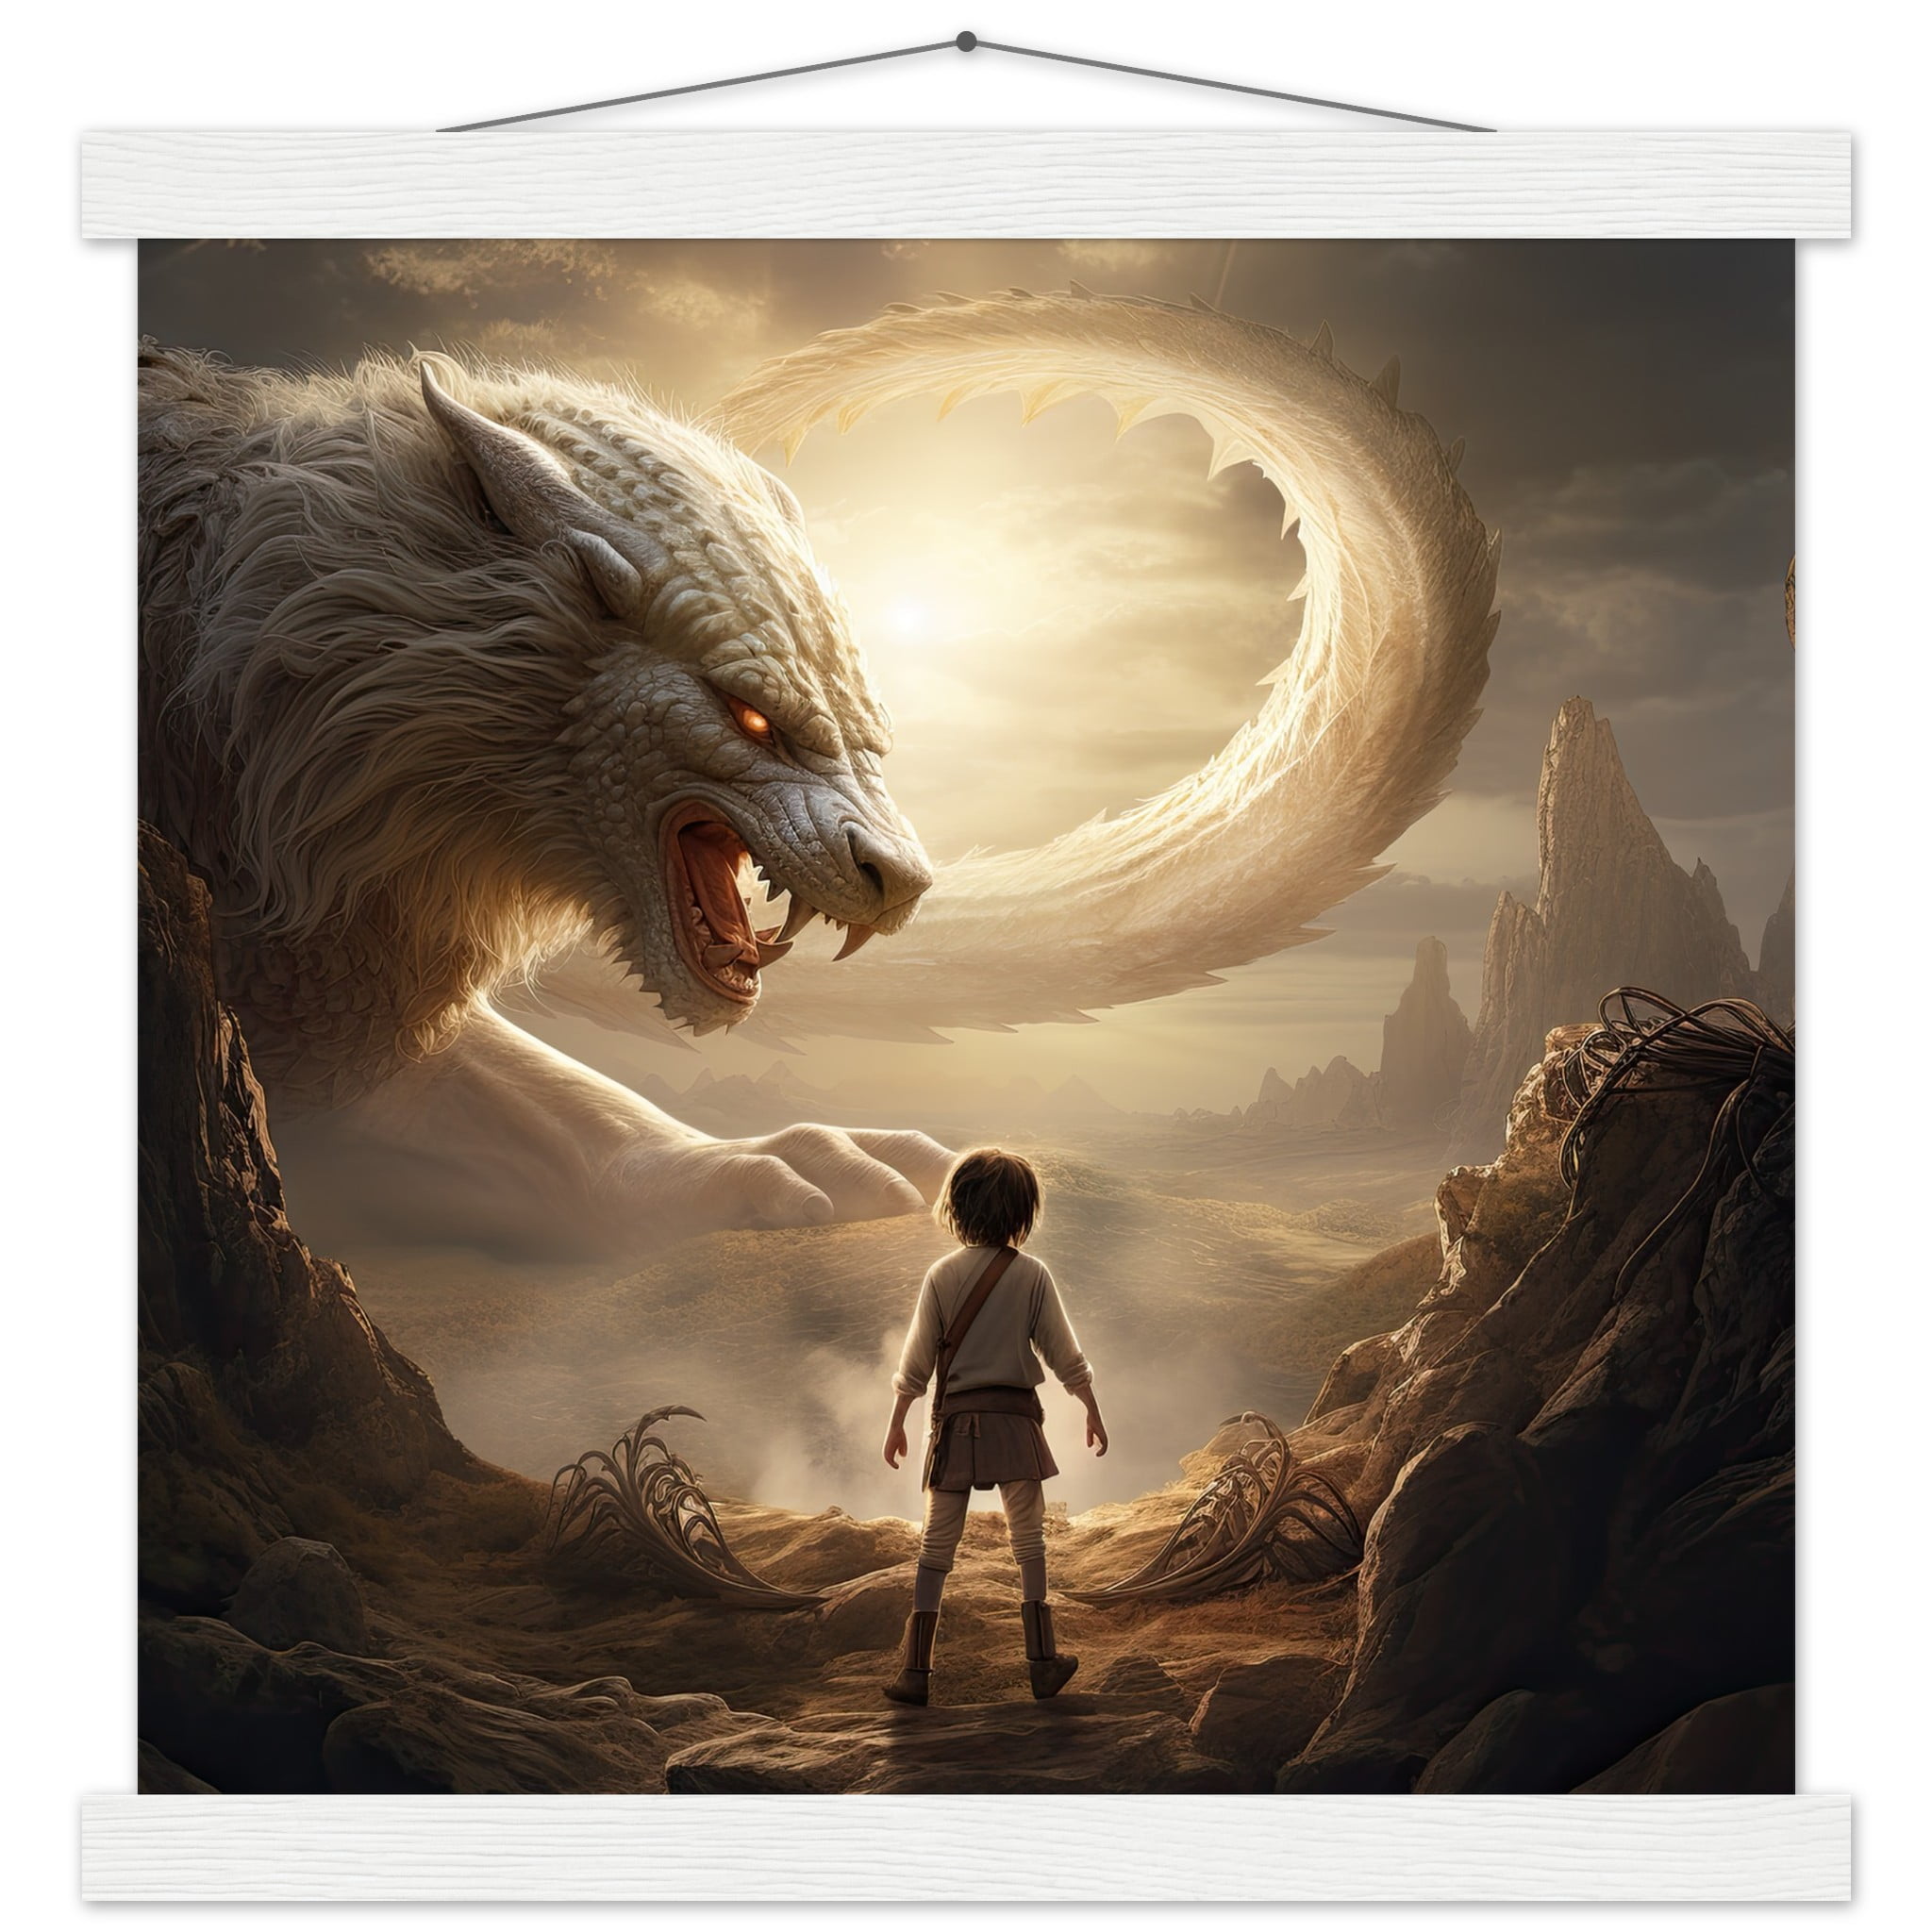 The Boy and the Chimera Art Print with Hanger – 35×35 cm / 14×14″, White wall hanger